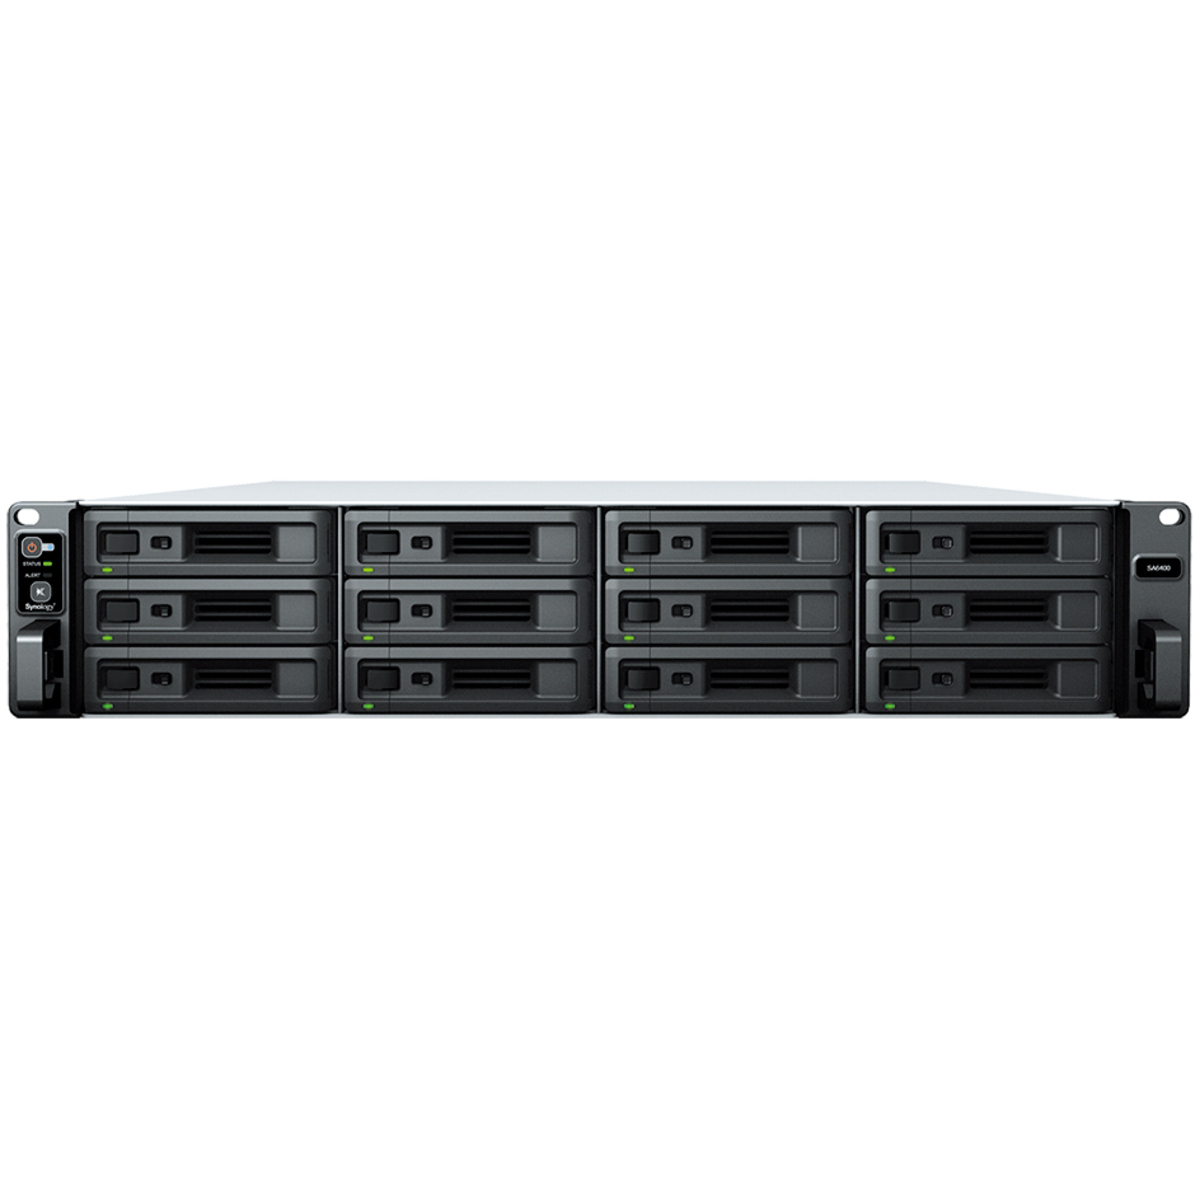 Synology RackStation SA6400 70tb 12-Bay RackMount Large Business / Enterprise NAS - Network Attached Storage Device 7x10tb Western Digital Red Plus WD101EFBX 3.5 7200rpm SATA 6Gb/s HDD NAS Class Drives Installed - Burn-In Tested RackStation SA6400